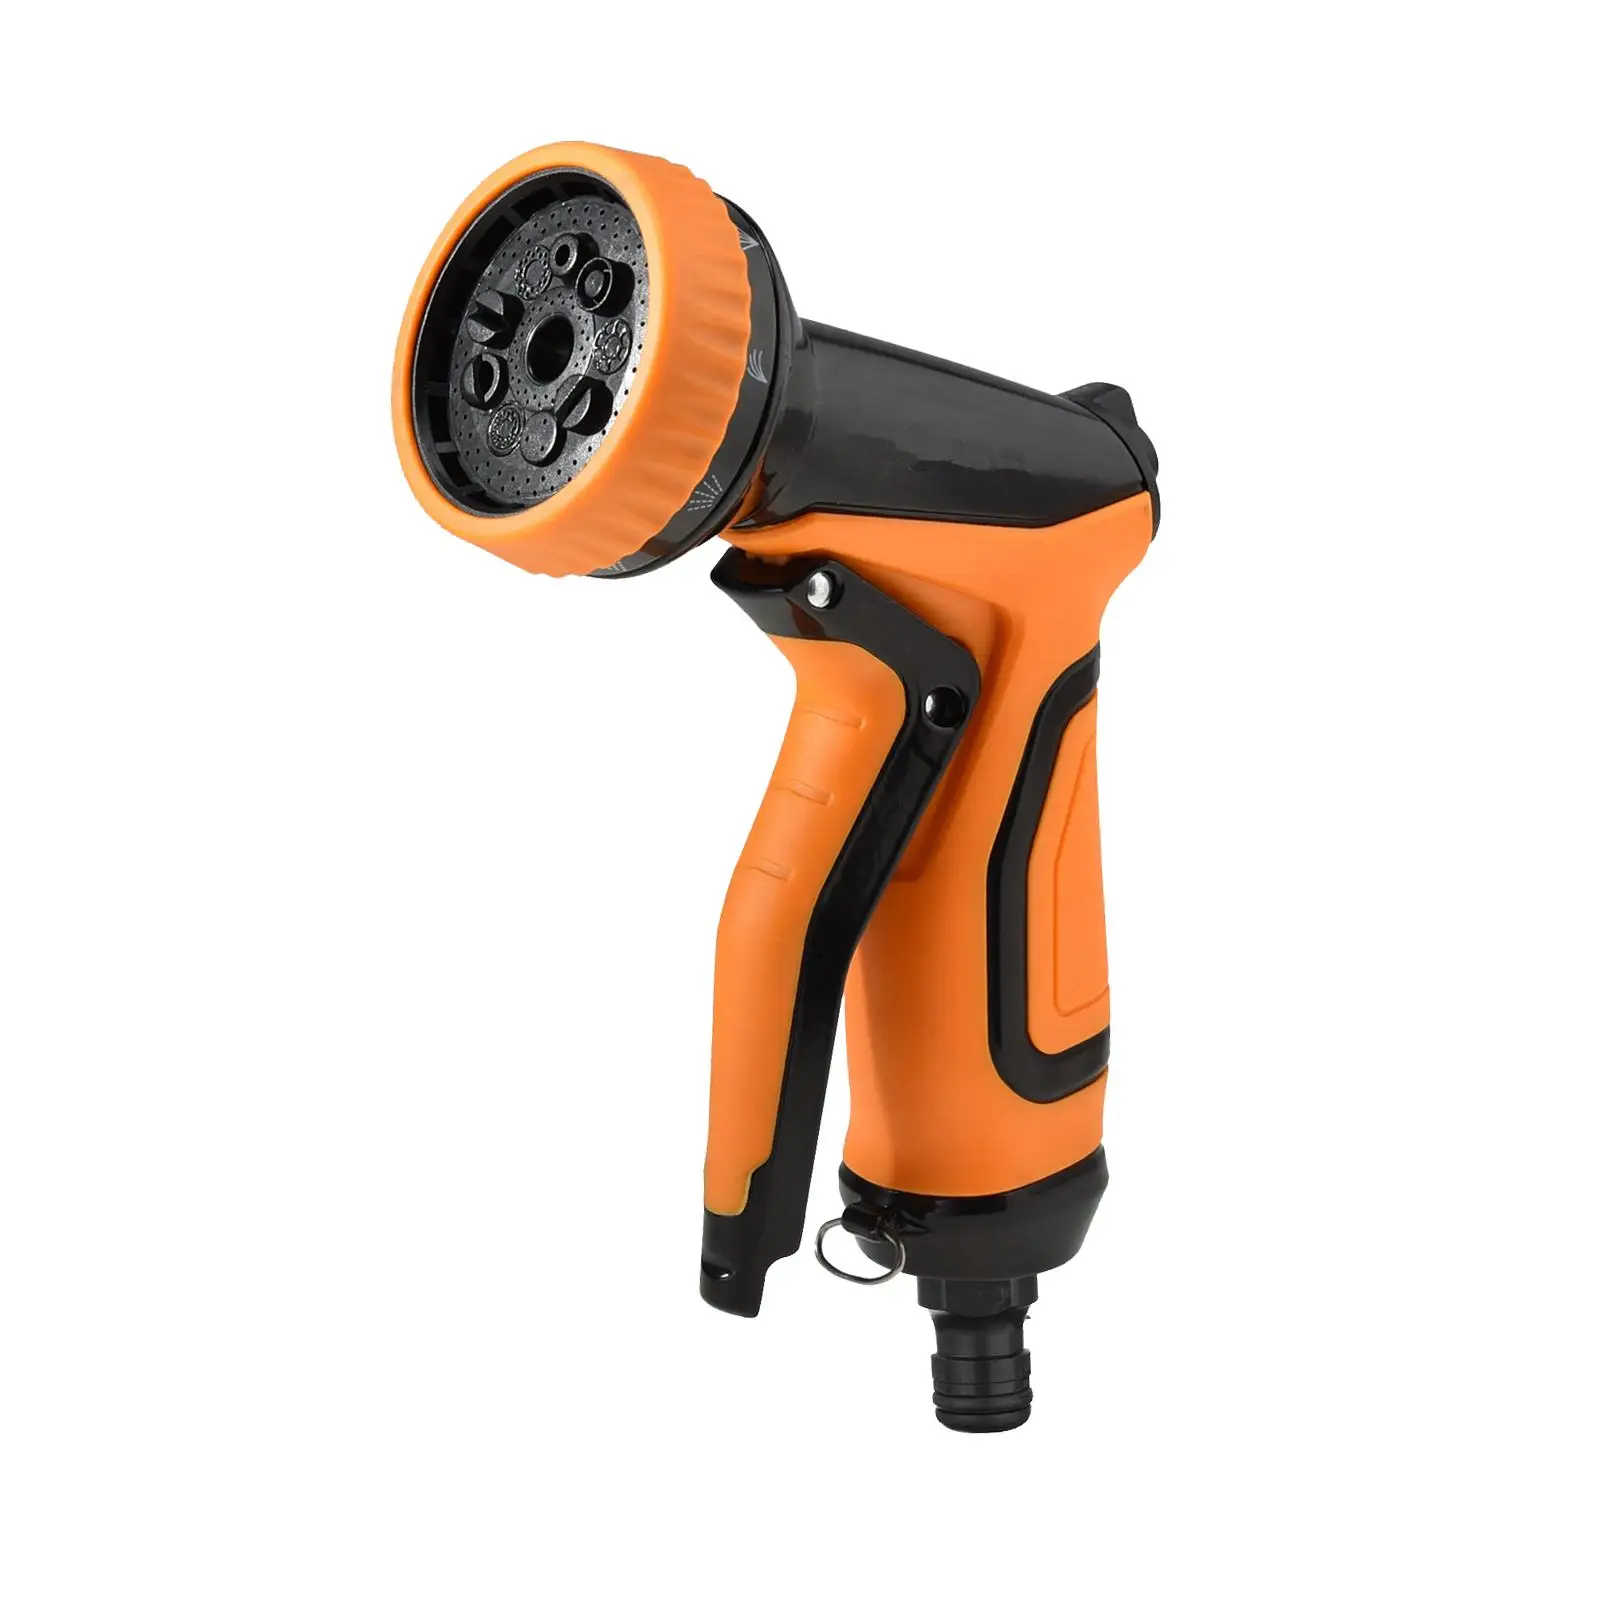 High Pressure Front Hose Sprayer Leakproof with 9 Patterns Multifunctional Hose Spray Nozzle for Lawn Driveway Window